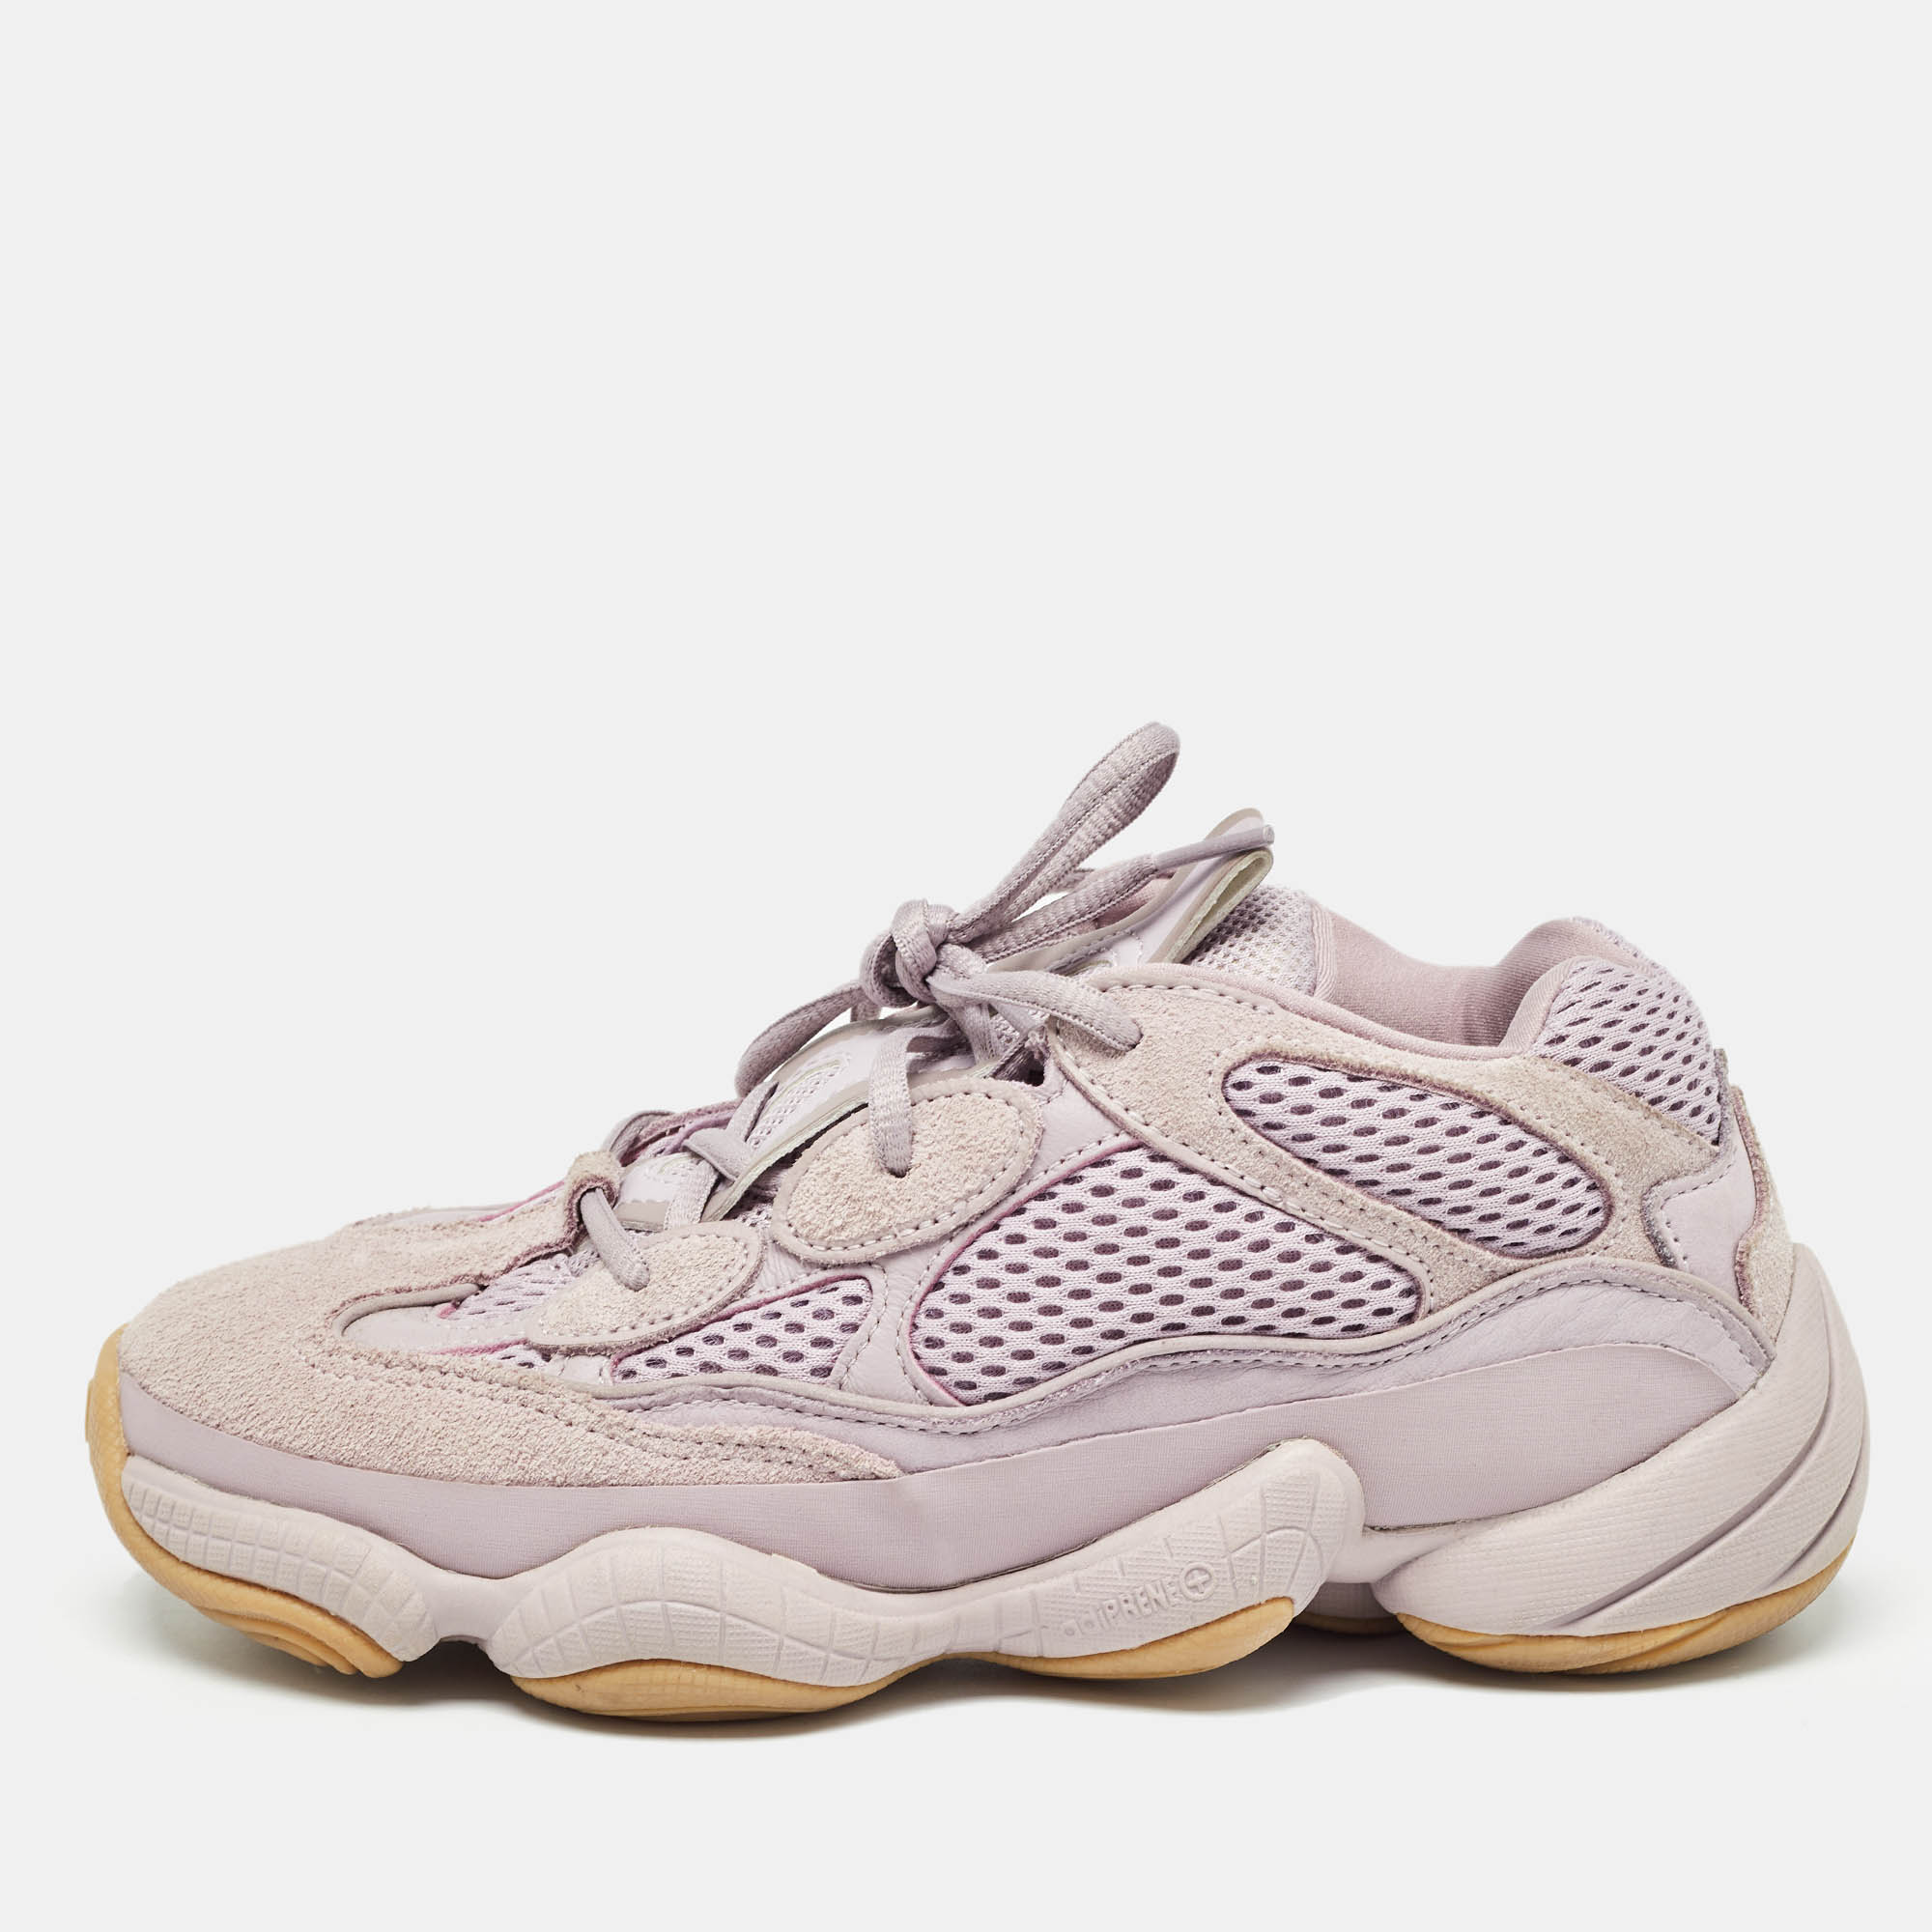 

Yeezy x Adidas Purple Suede and Fabric Yeezy 500 Sneakers Size